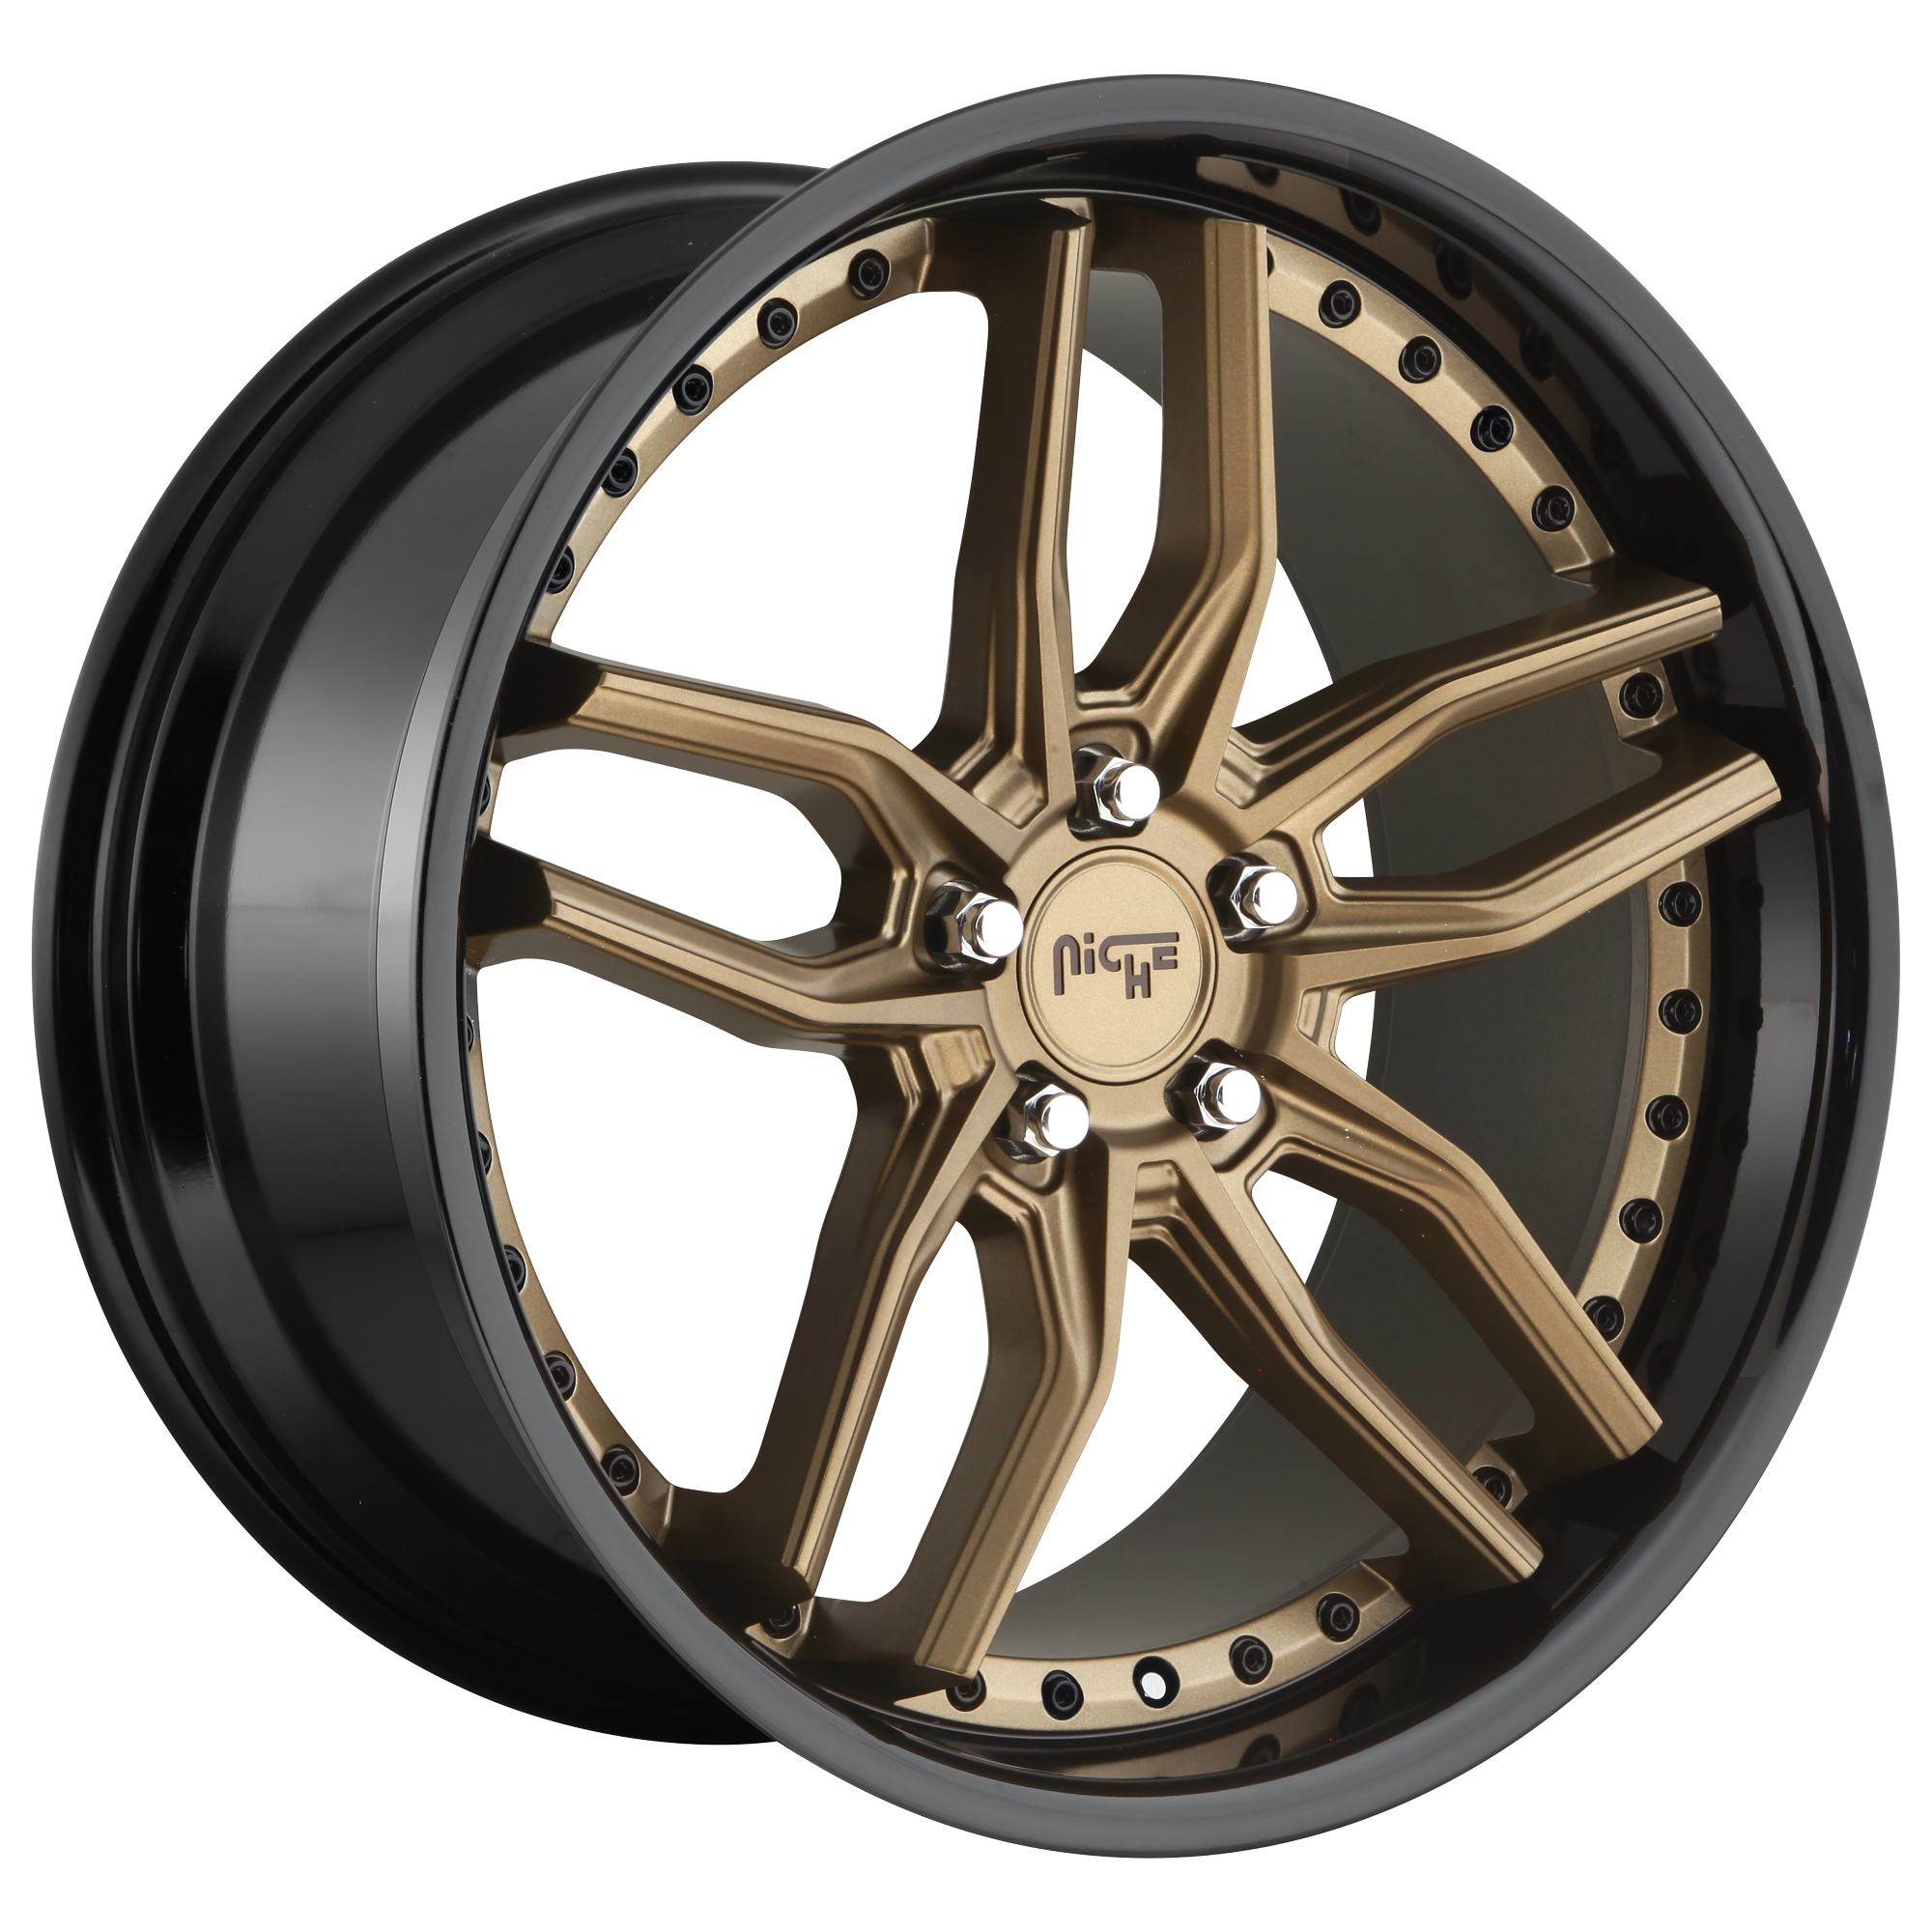 METHOS 20x9 5x112.00 MATTE BRONZE BLACK BEAD RING (38 mm) - Tires and Engine Performance